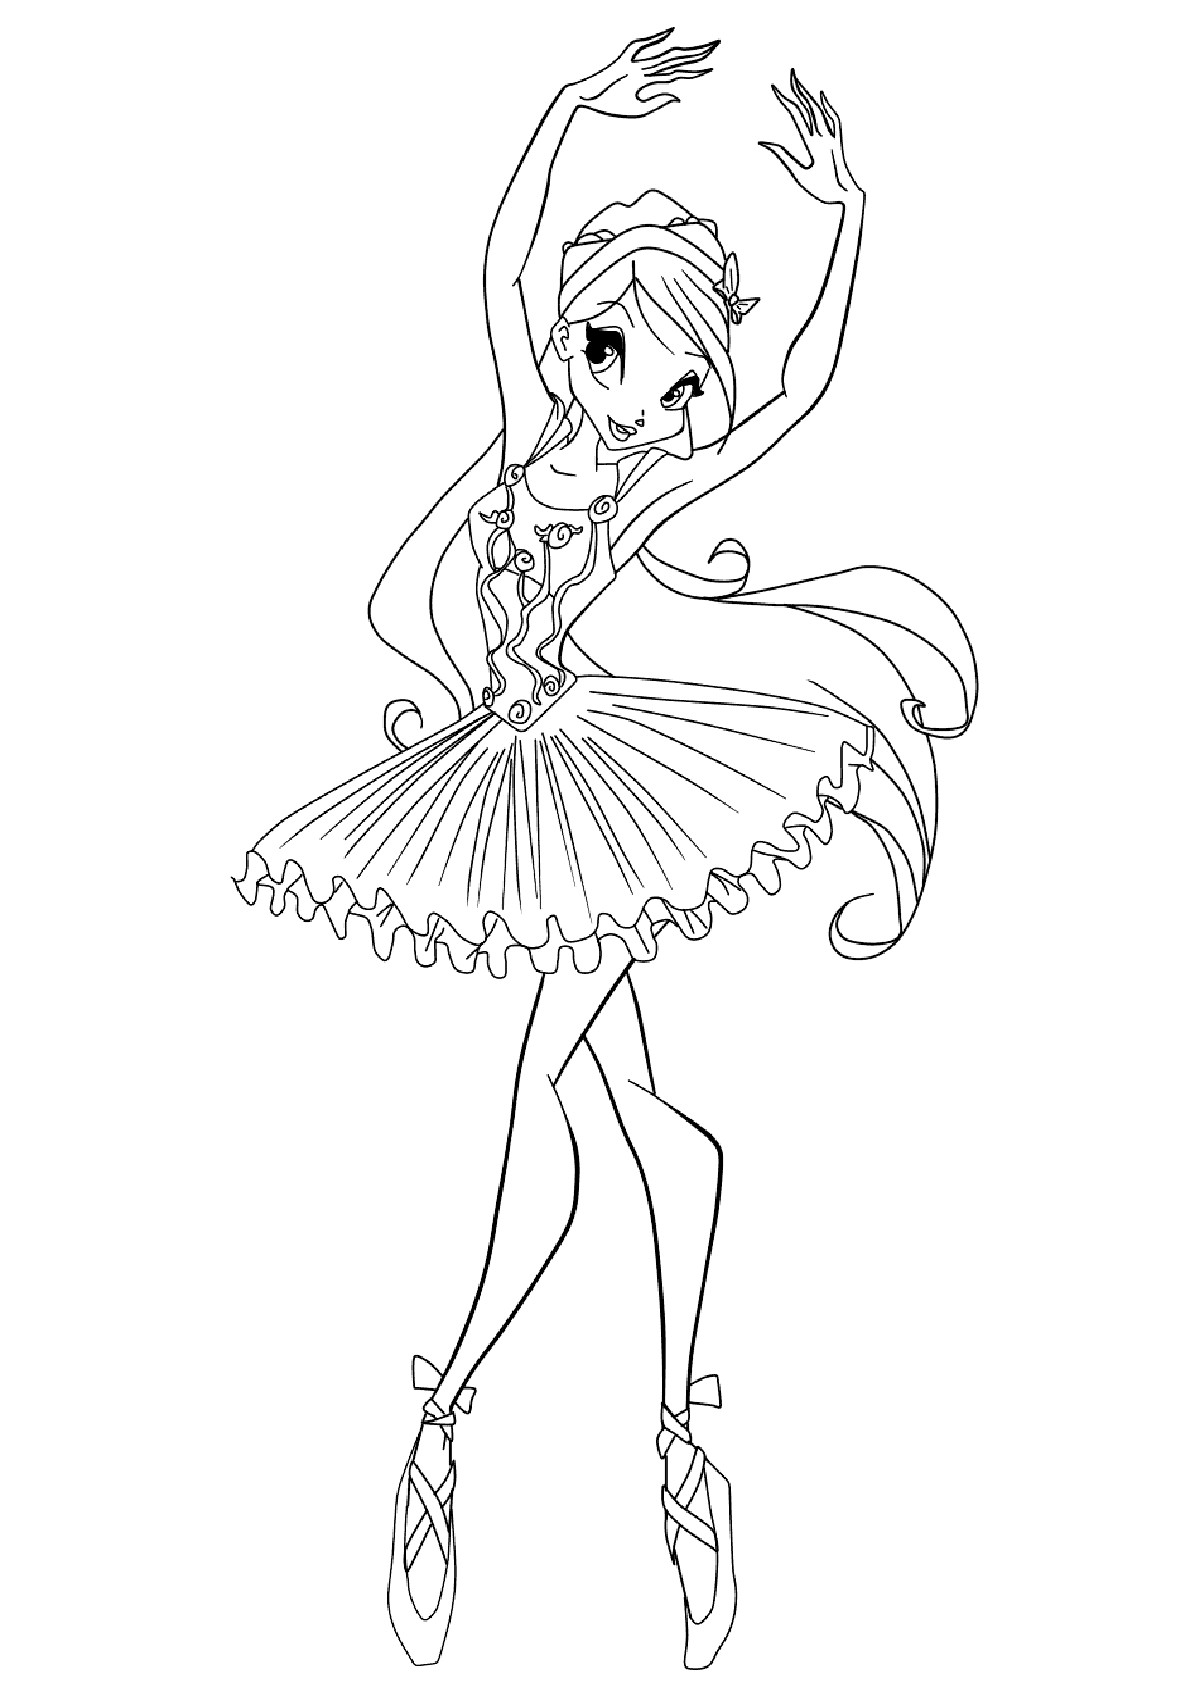 Ballerina Coloring Pages For Kids
 Ballerina Coloring Pages for childrens printable for free